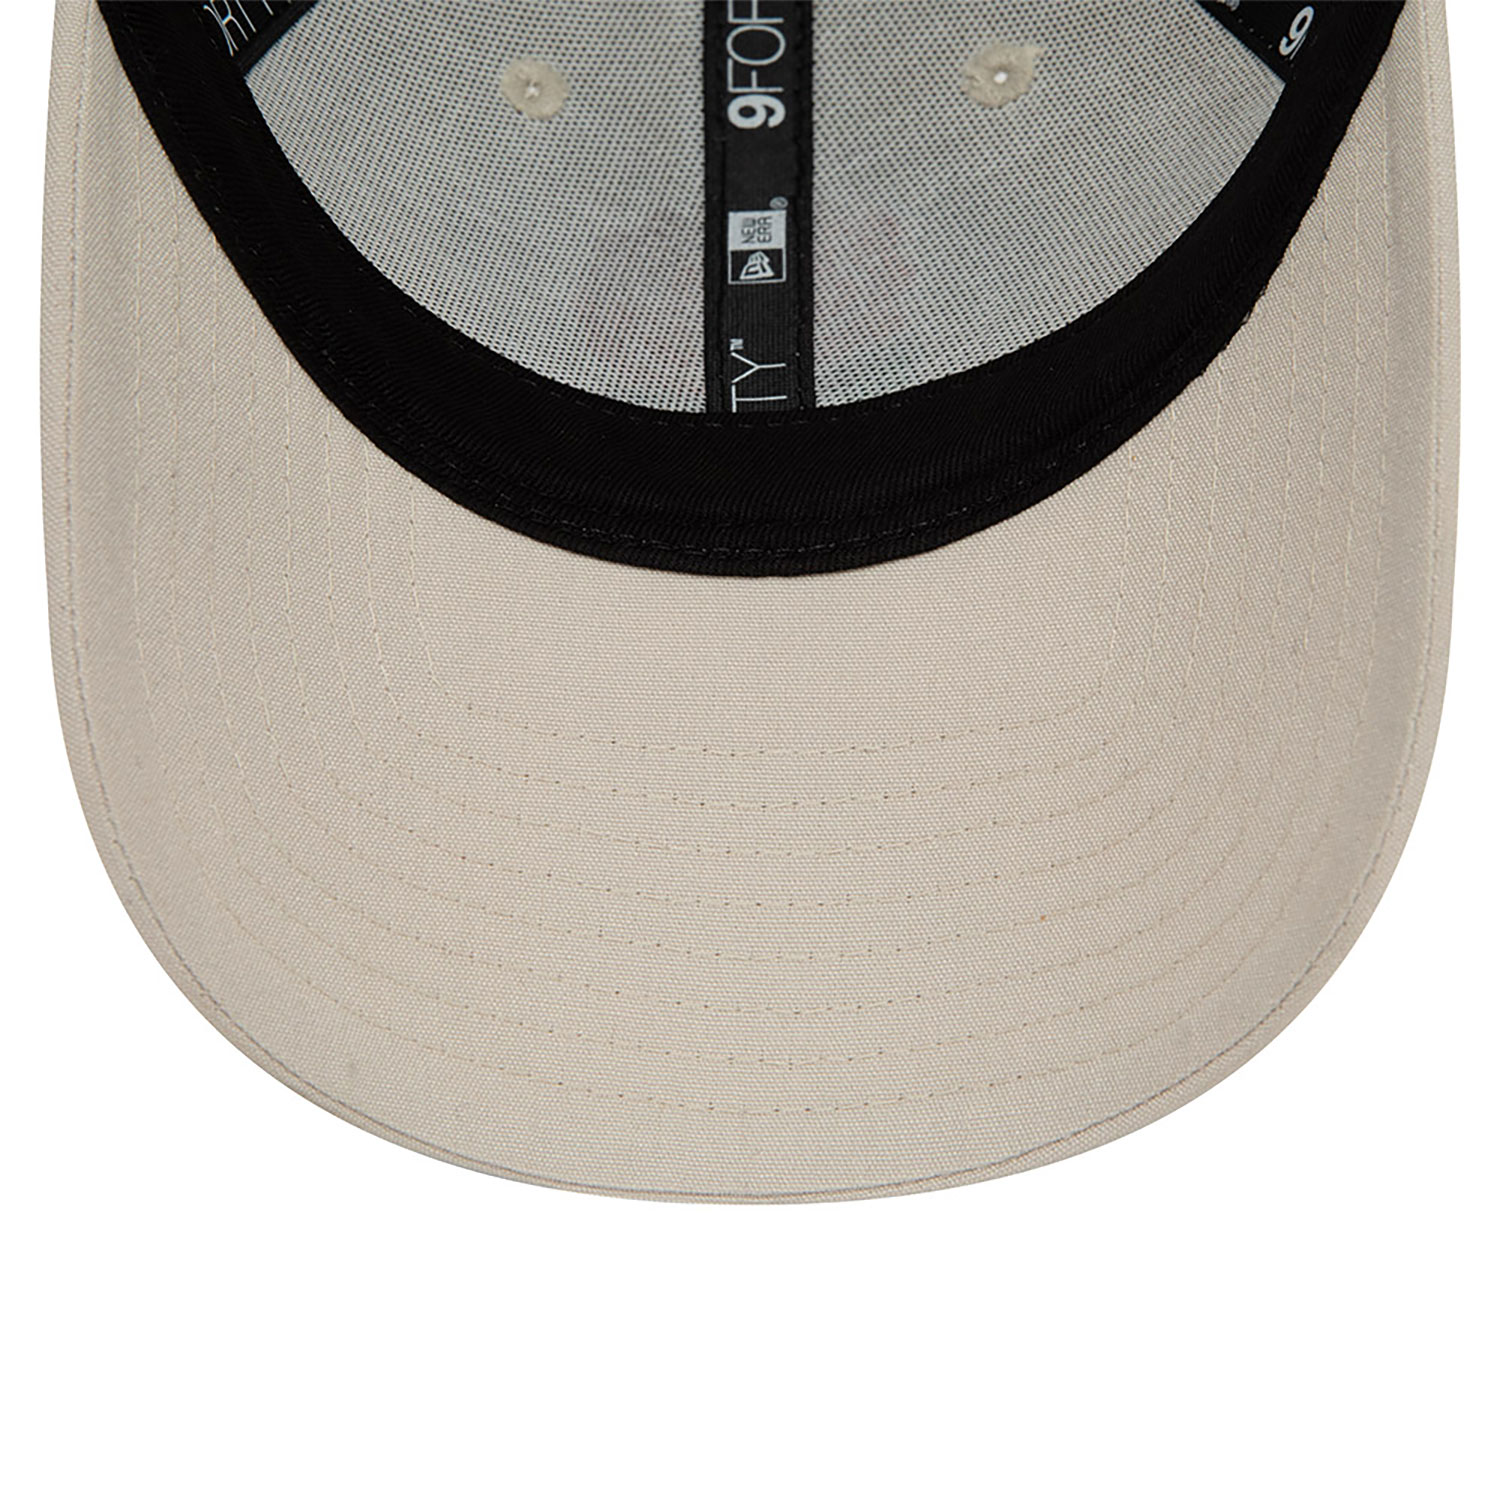 Rugby Football Union Repreve Stone 9FORTY Adjustable Cap